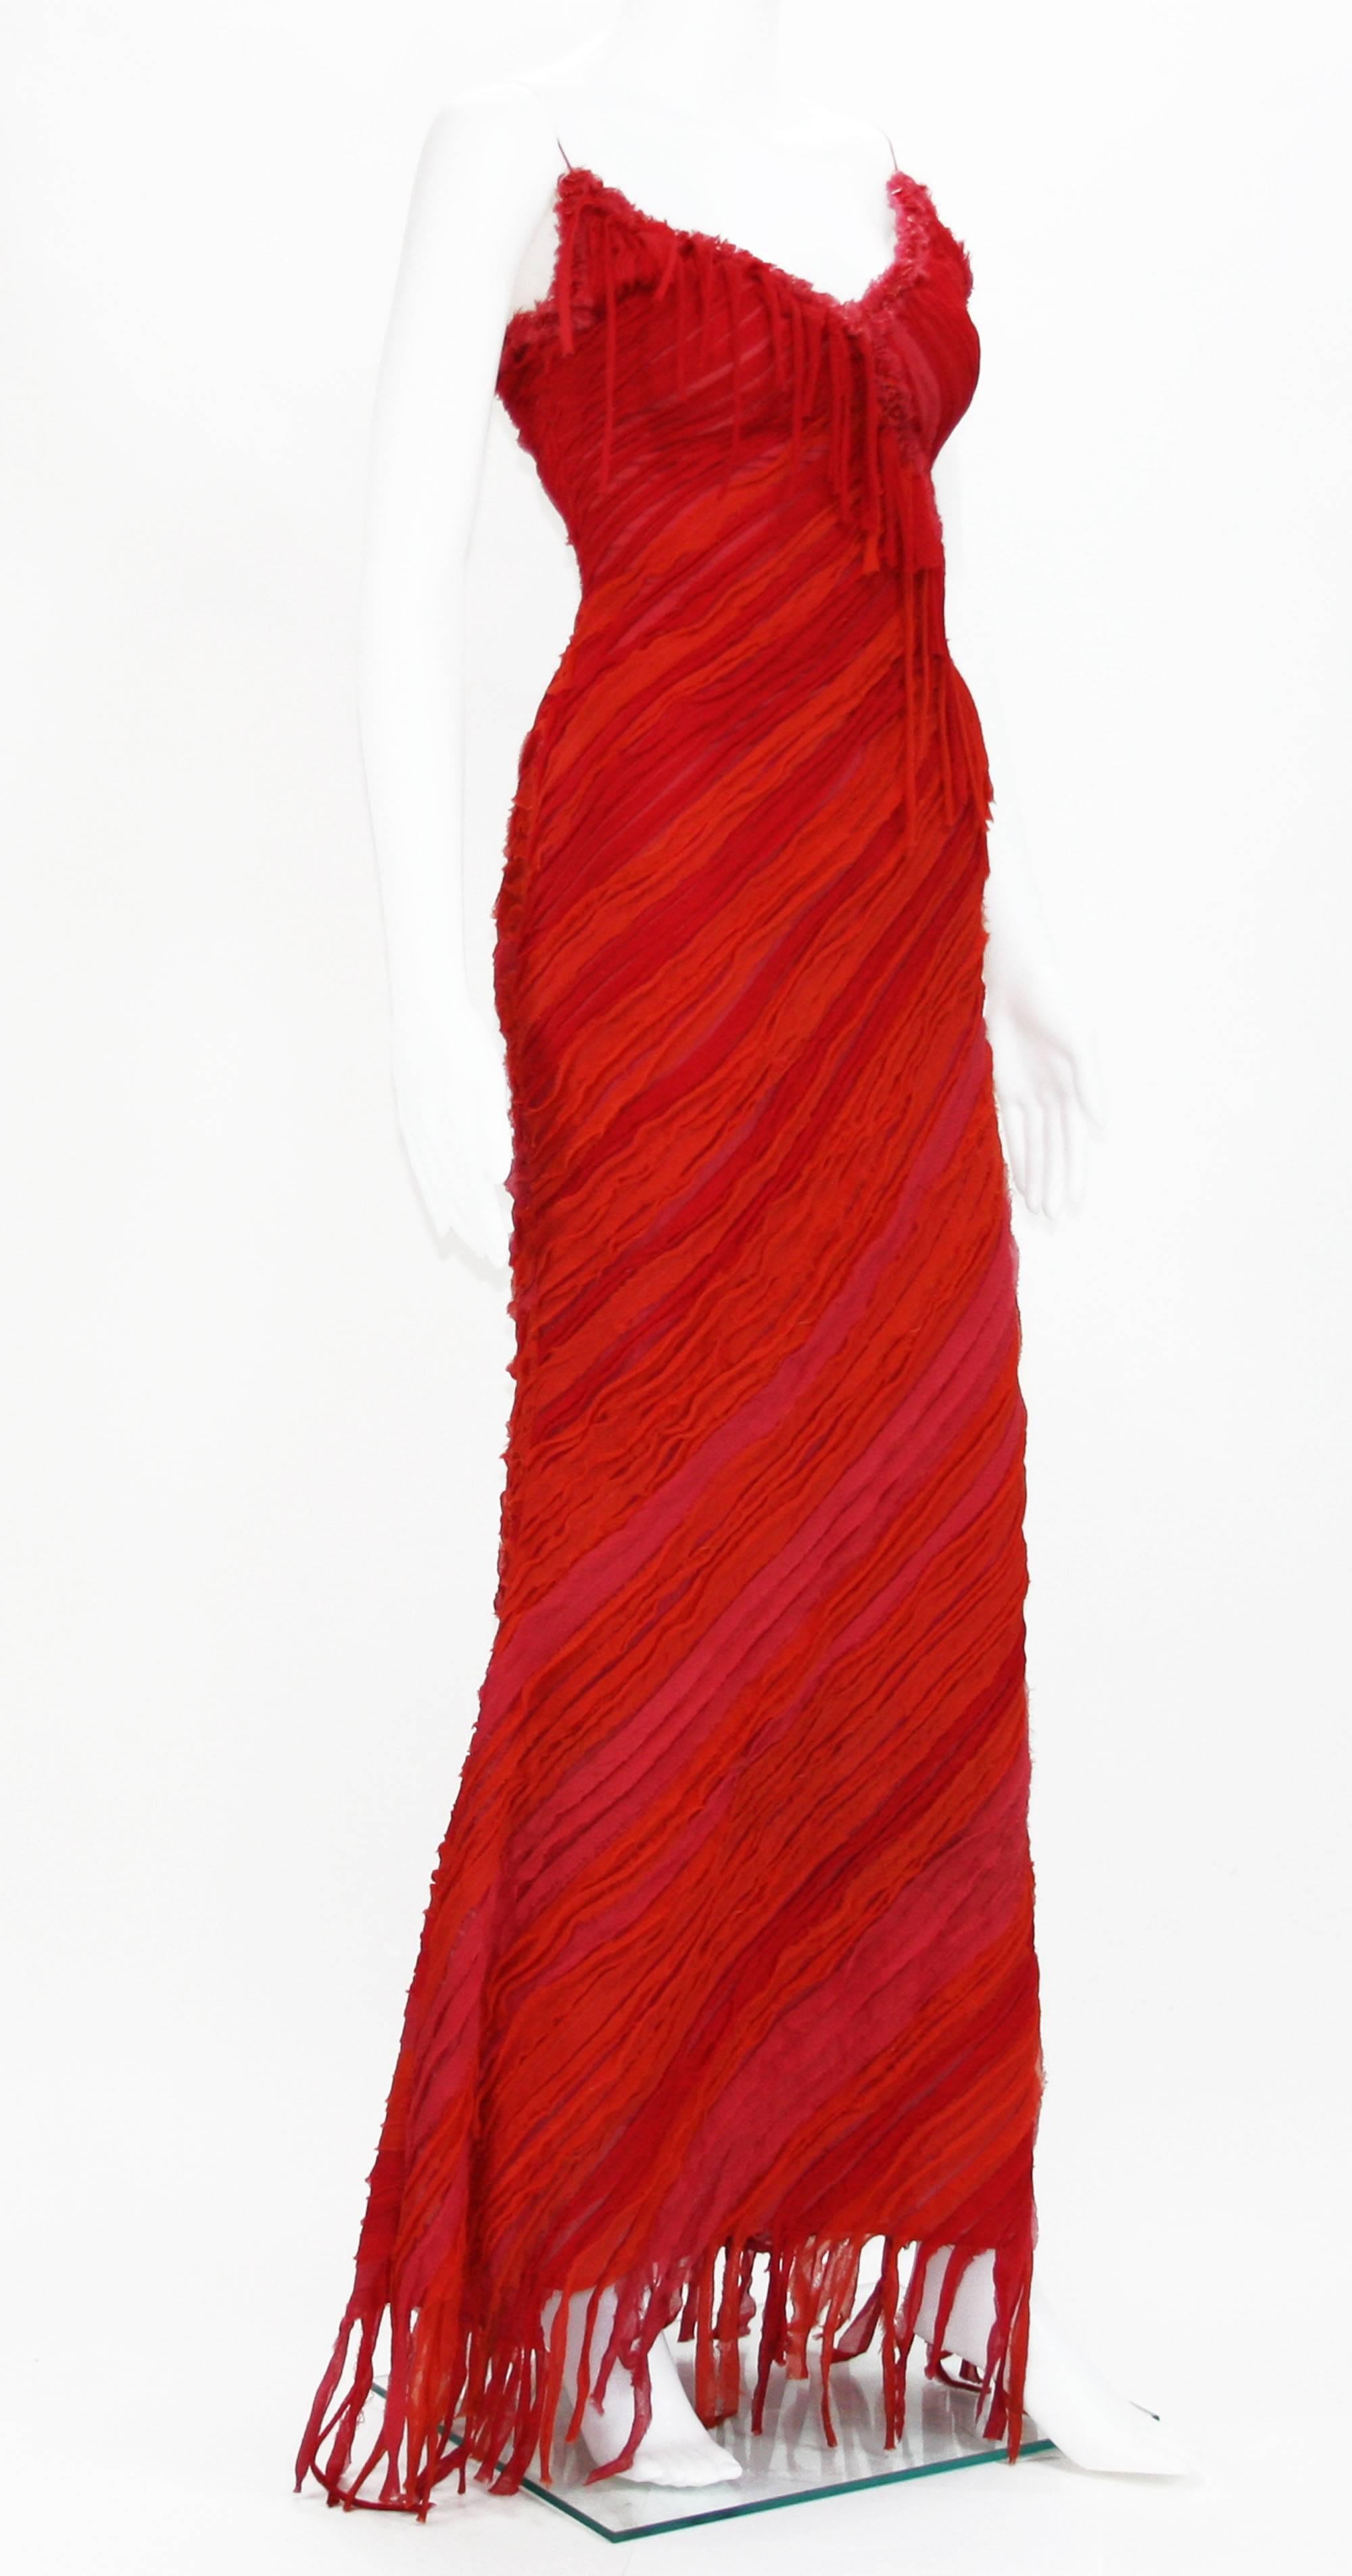 Naeem Khan Red Embellished Long Dress 
100% Pure Silk
Size 6
Colors - Red, Orange, Fuchsia., Distressed Look, Red Coral Embroidery, Back Zip Closure, Fully Lined.
Measurements: Length - 56 Inches + 5 inches fringe, Bust - 30 inches, Waist - 26